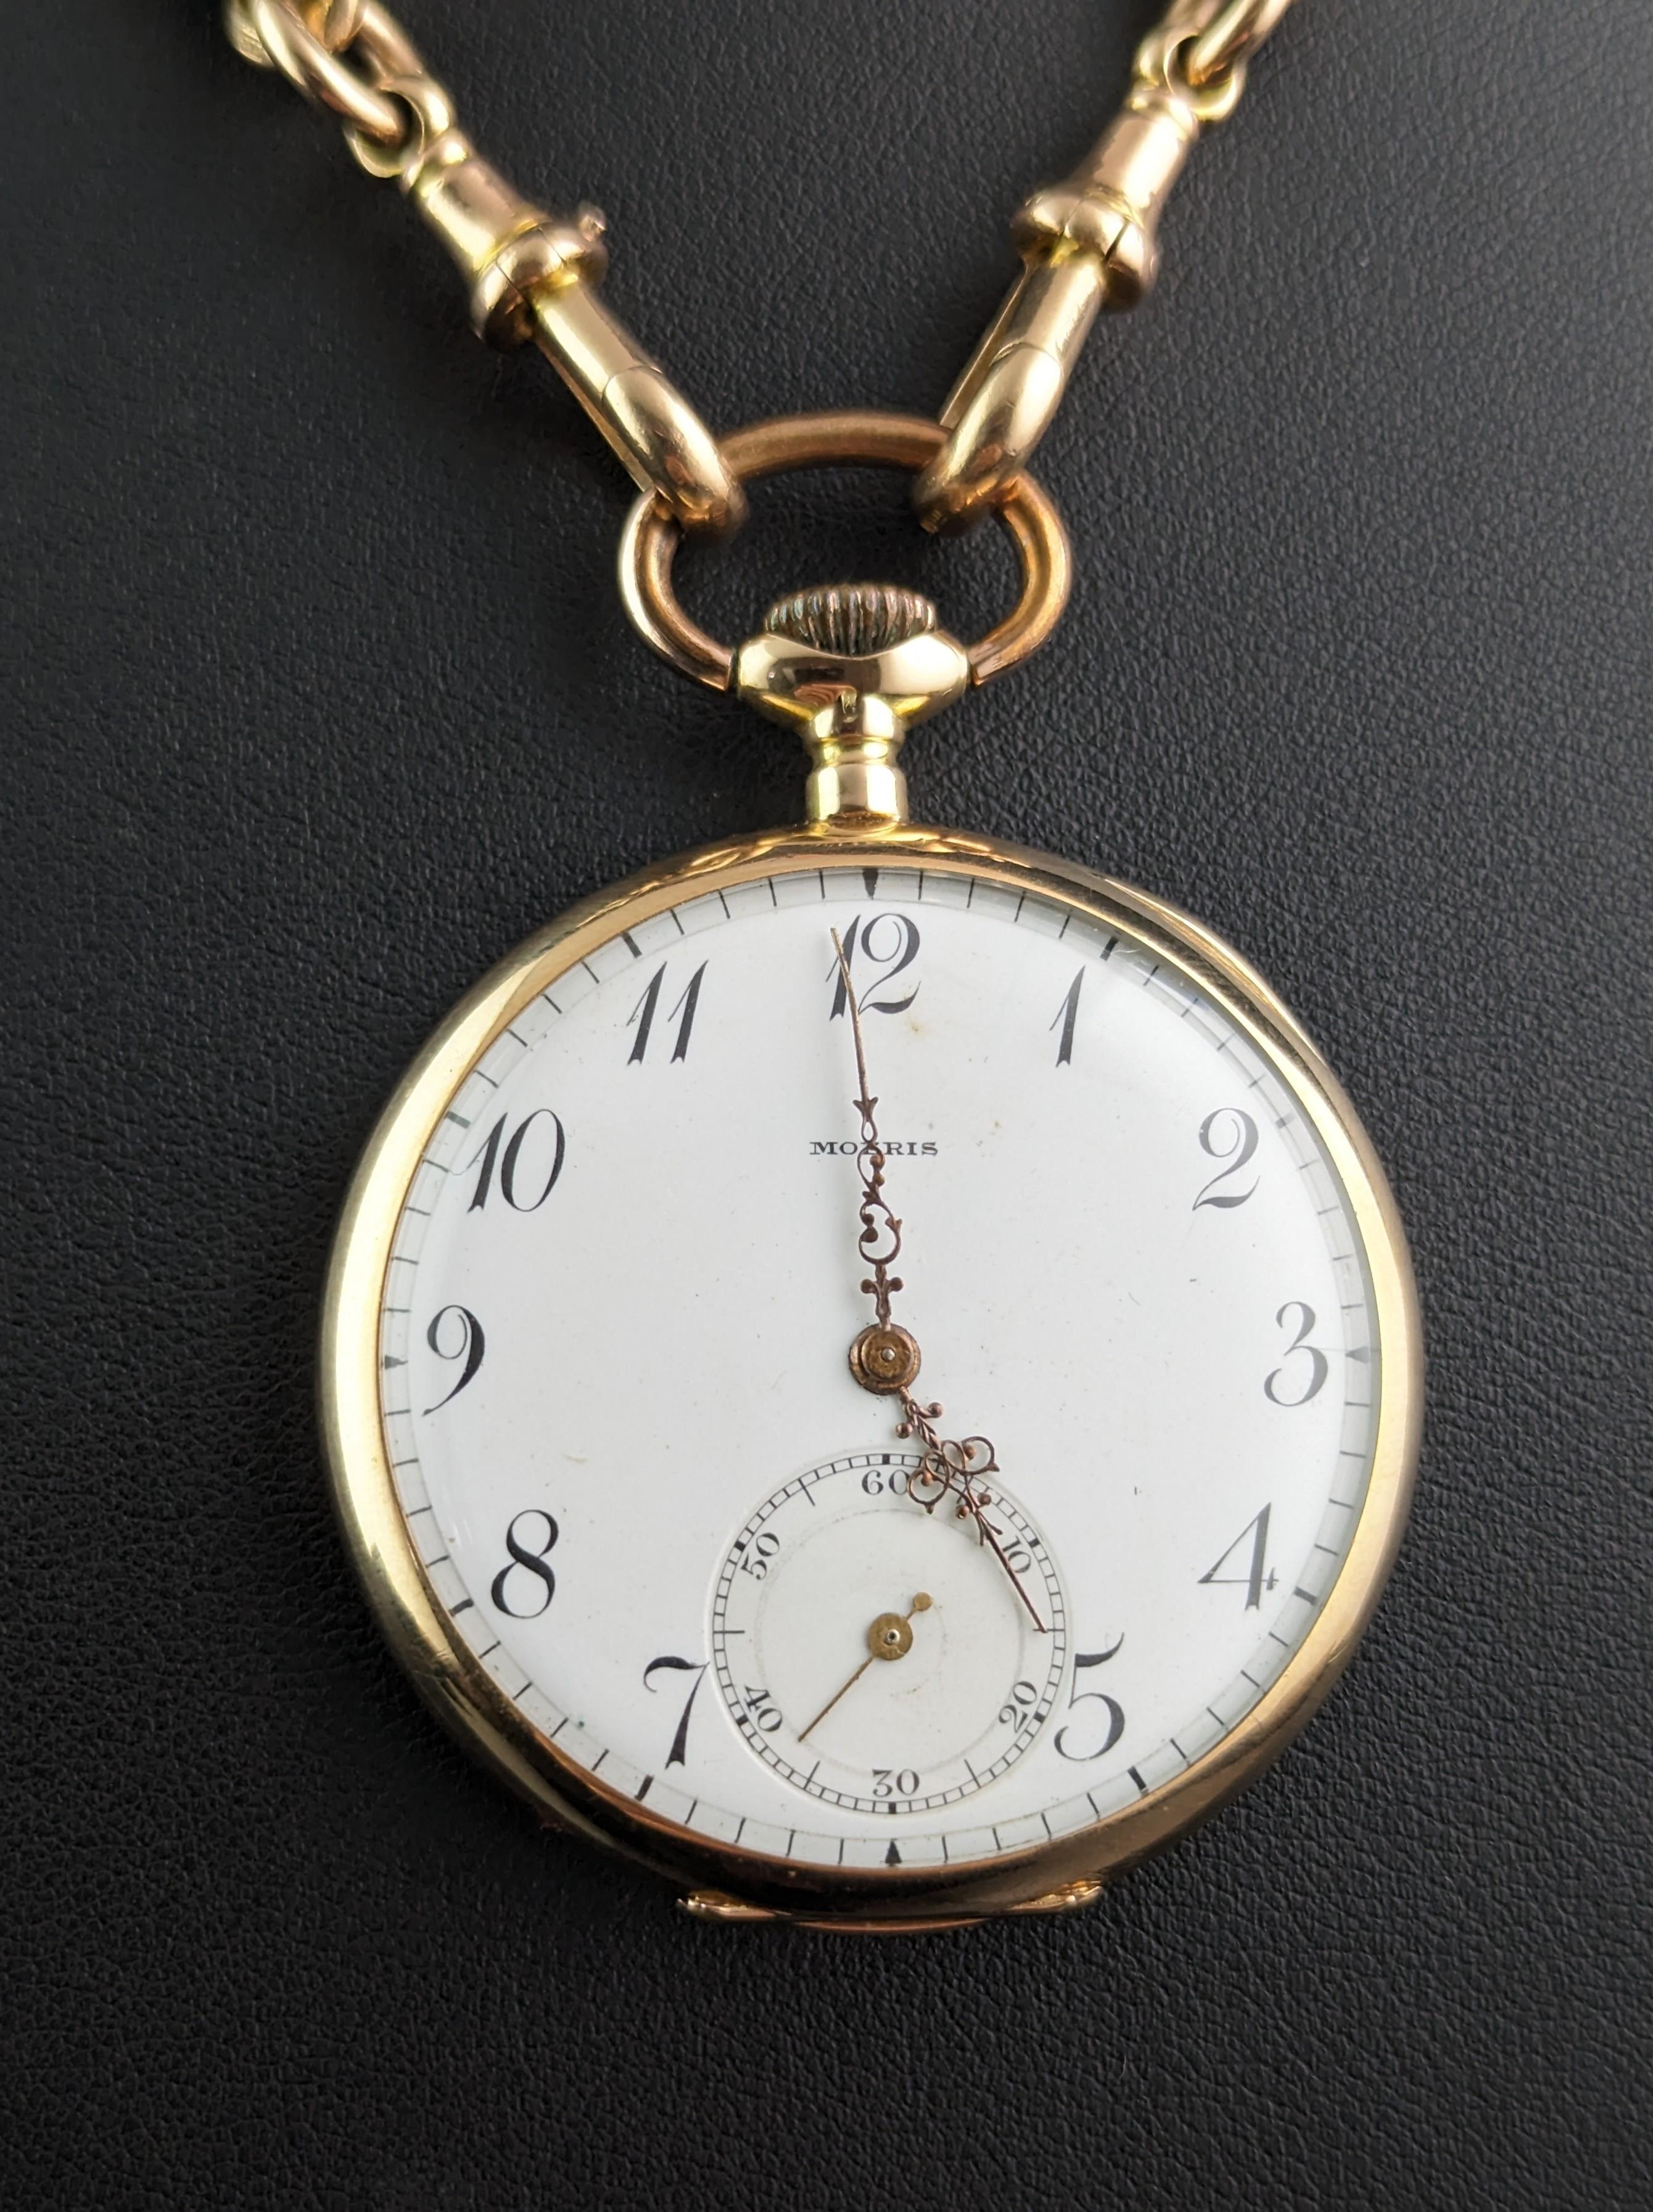 An antique gold pocket watch is such an iconic gift and a wonderful piece to add to your collection.

A functional work of art this antique 14ct gold Moeris pocket watch is a stylish choice.

It has a Moeris movement with a Swiss 14ct gold case,